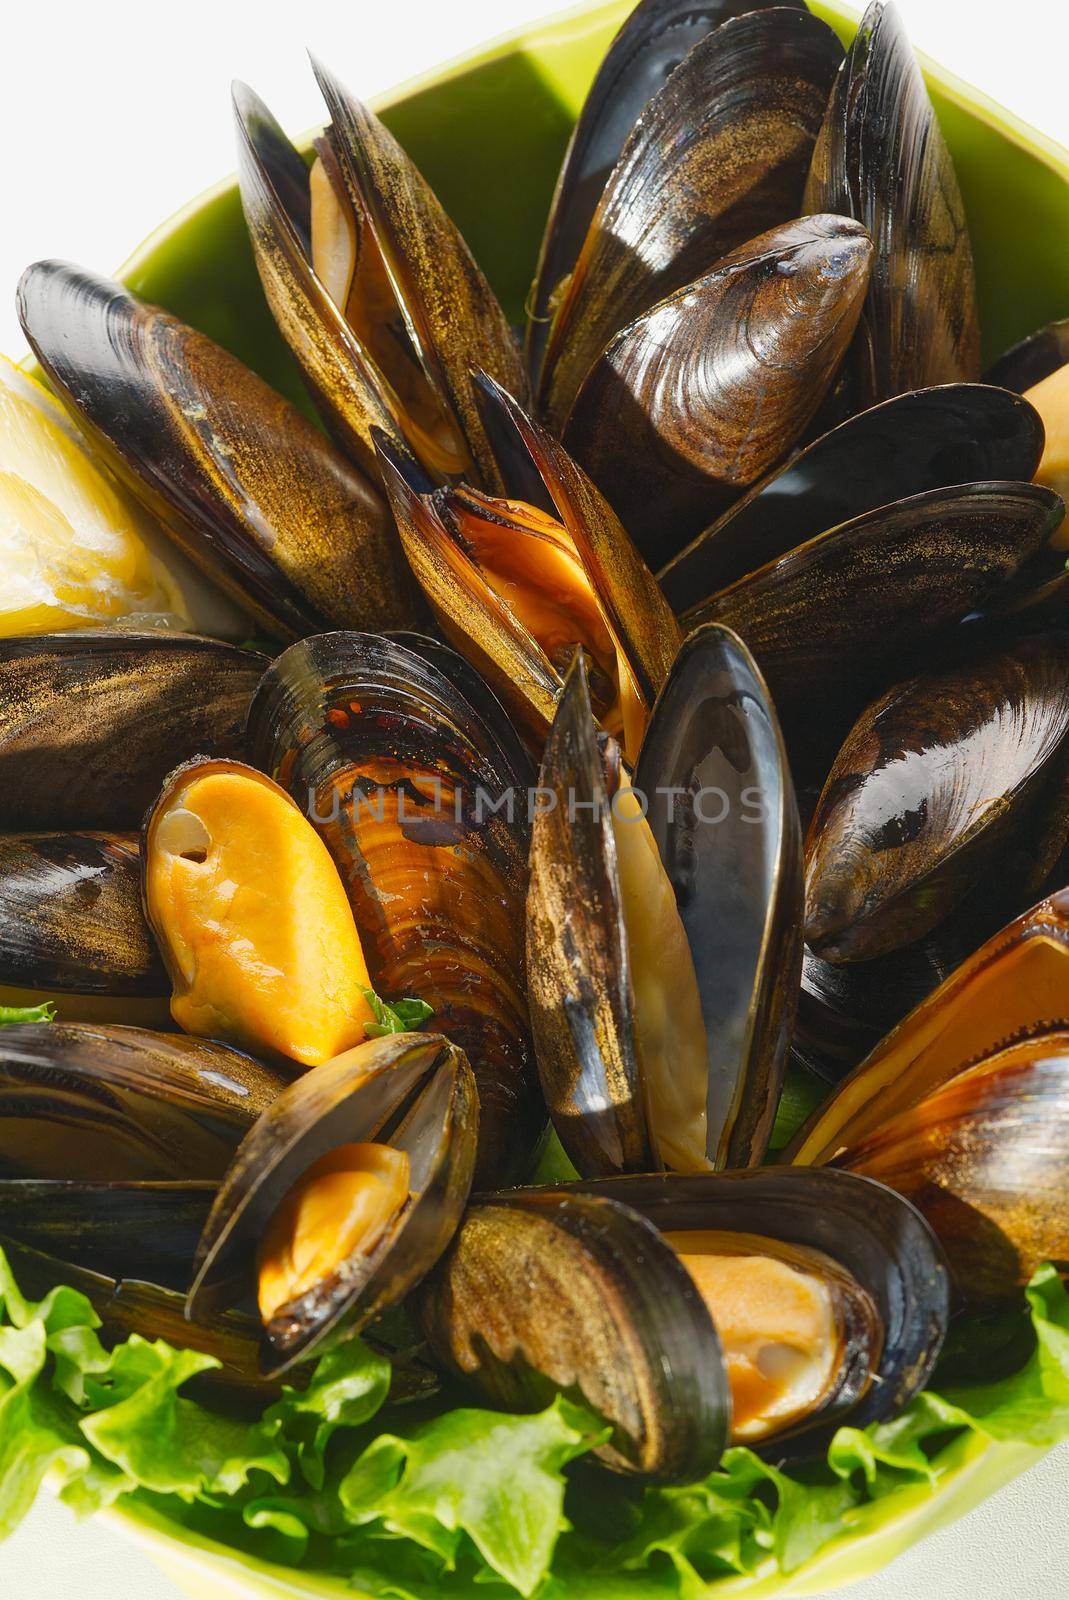 Cooked mussels with lemon and parsley on table. served mussels ready to eat by PhotoTime